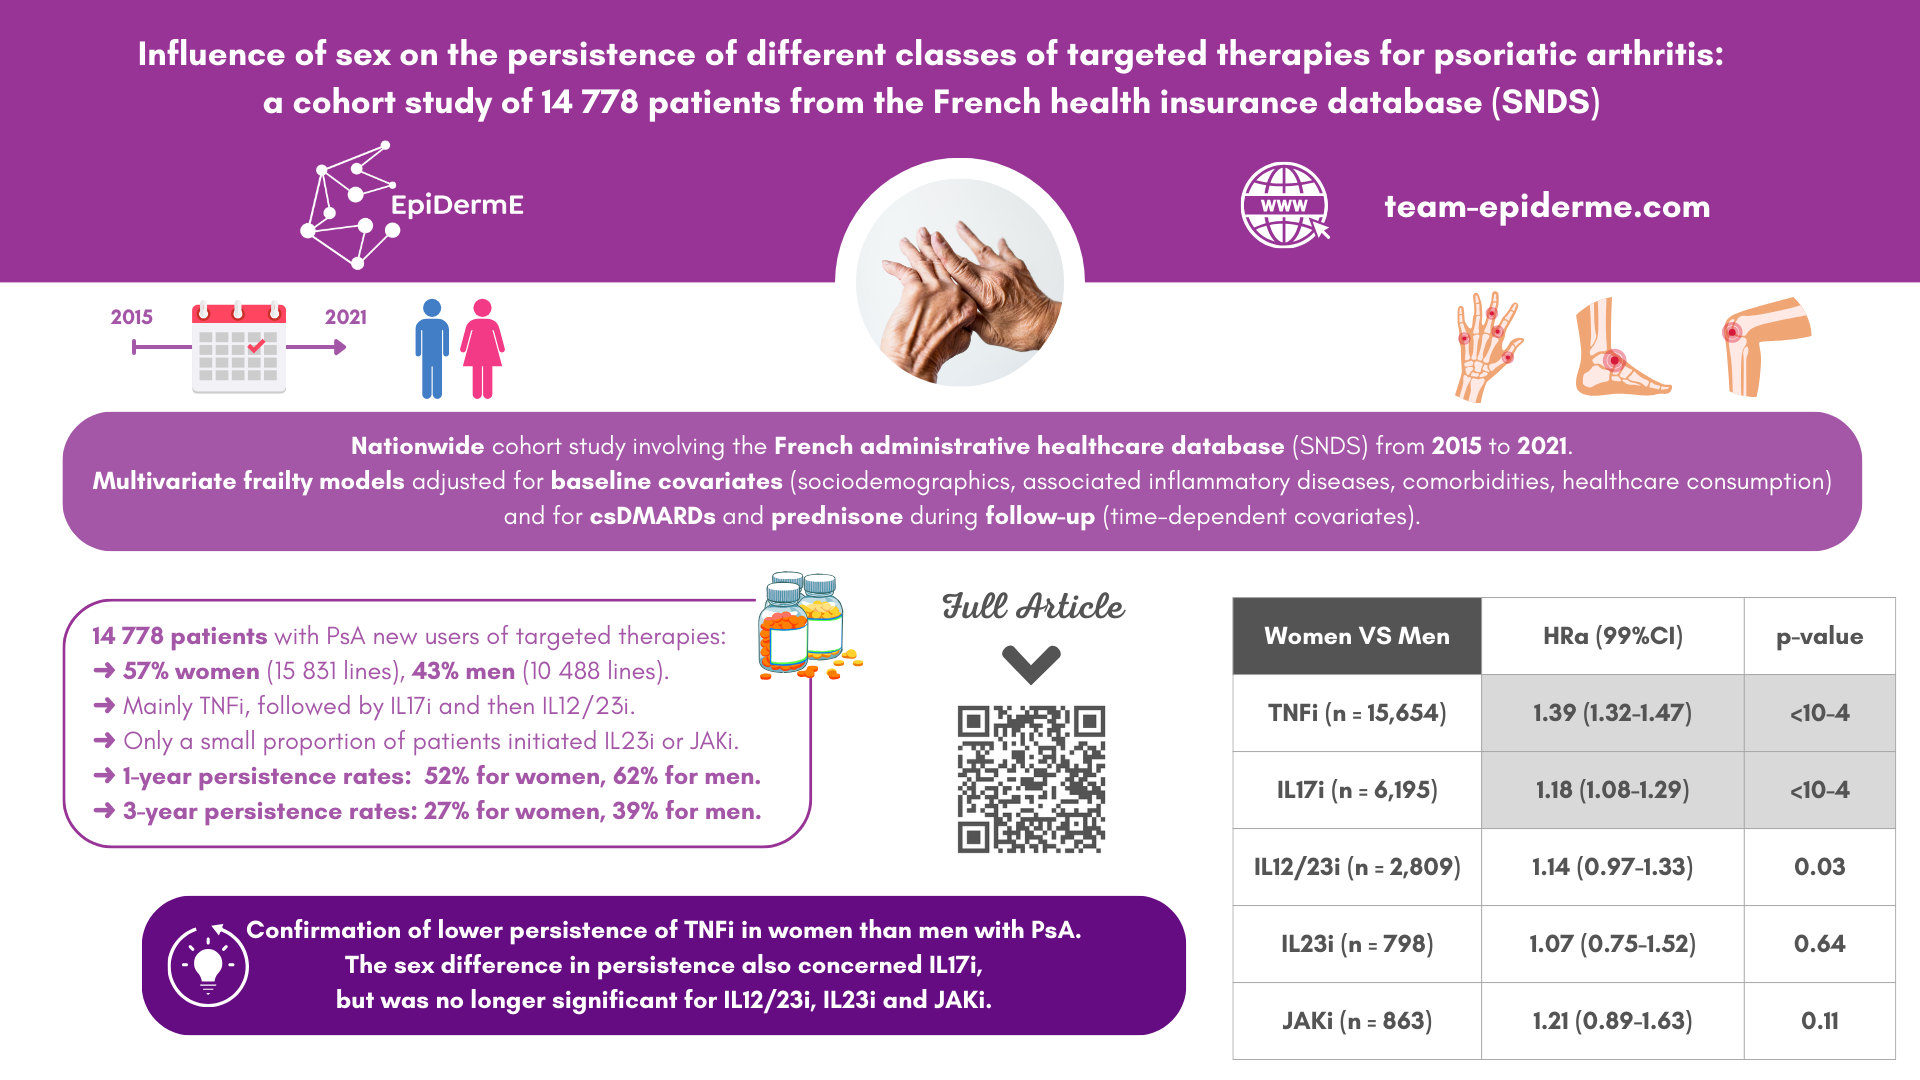 Influence of sex on the persistence of different classes of targeted therapies for psoriatic arthritis: a cohort study of 14 778 patients from the French health insurance database (SNDS)